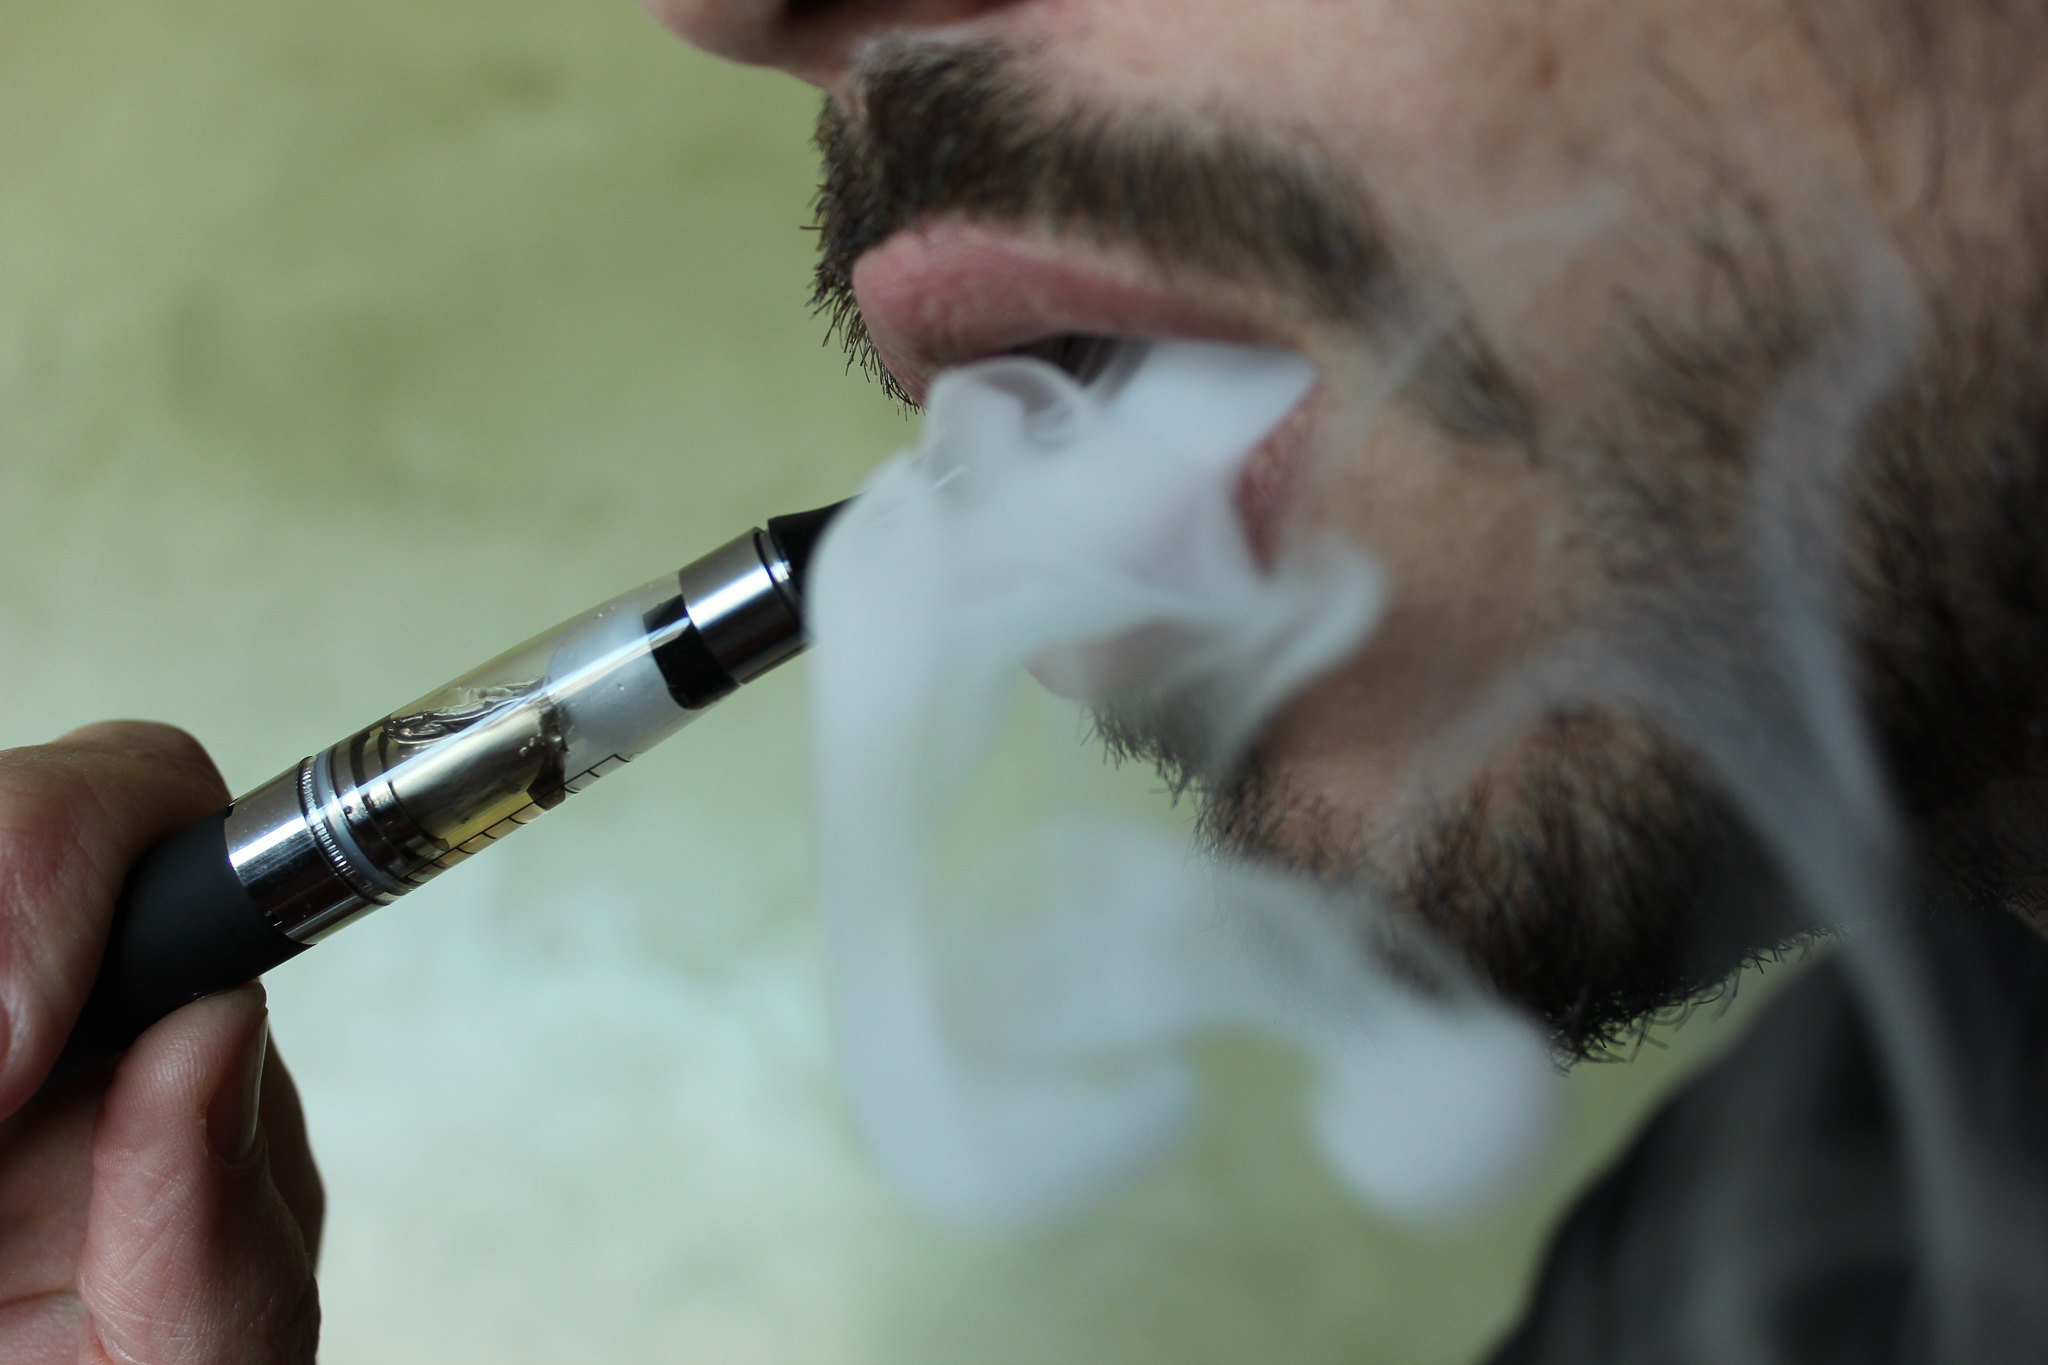 Recreational vaping to be banned by Albanese Government